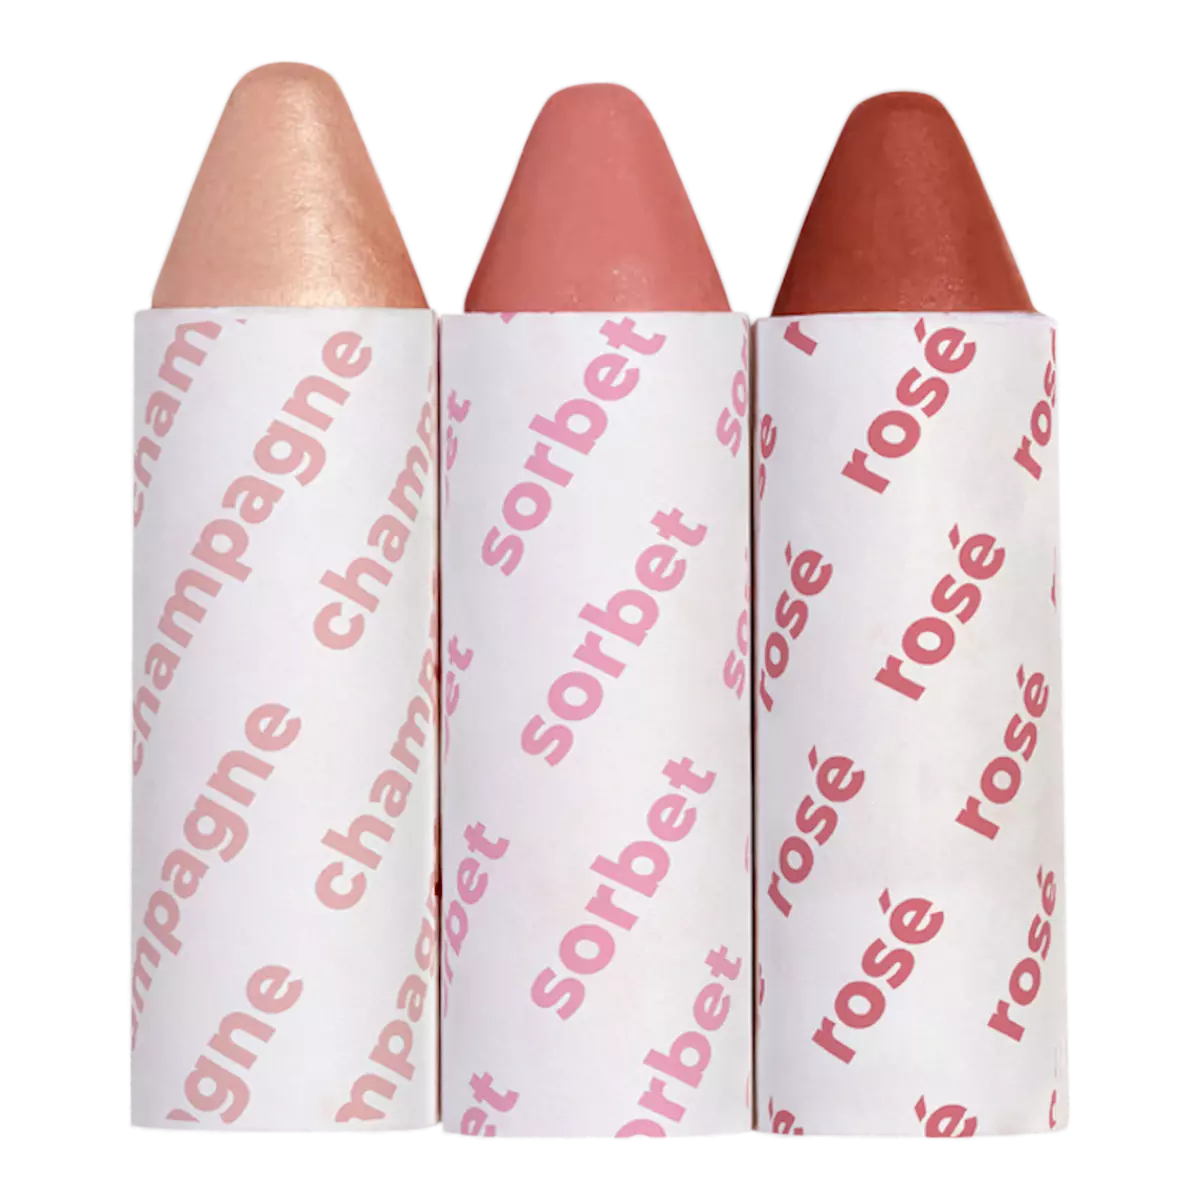 Axiology Lip-To-Lid Balmies | Cotton Candy Skies